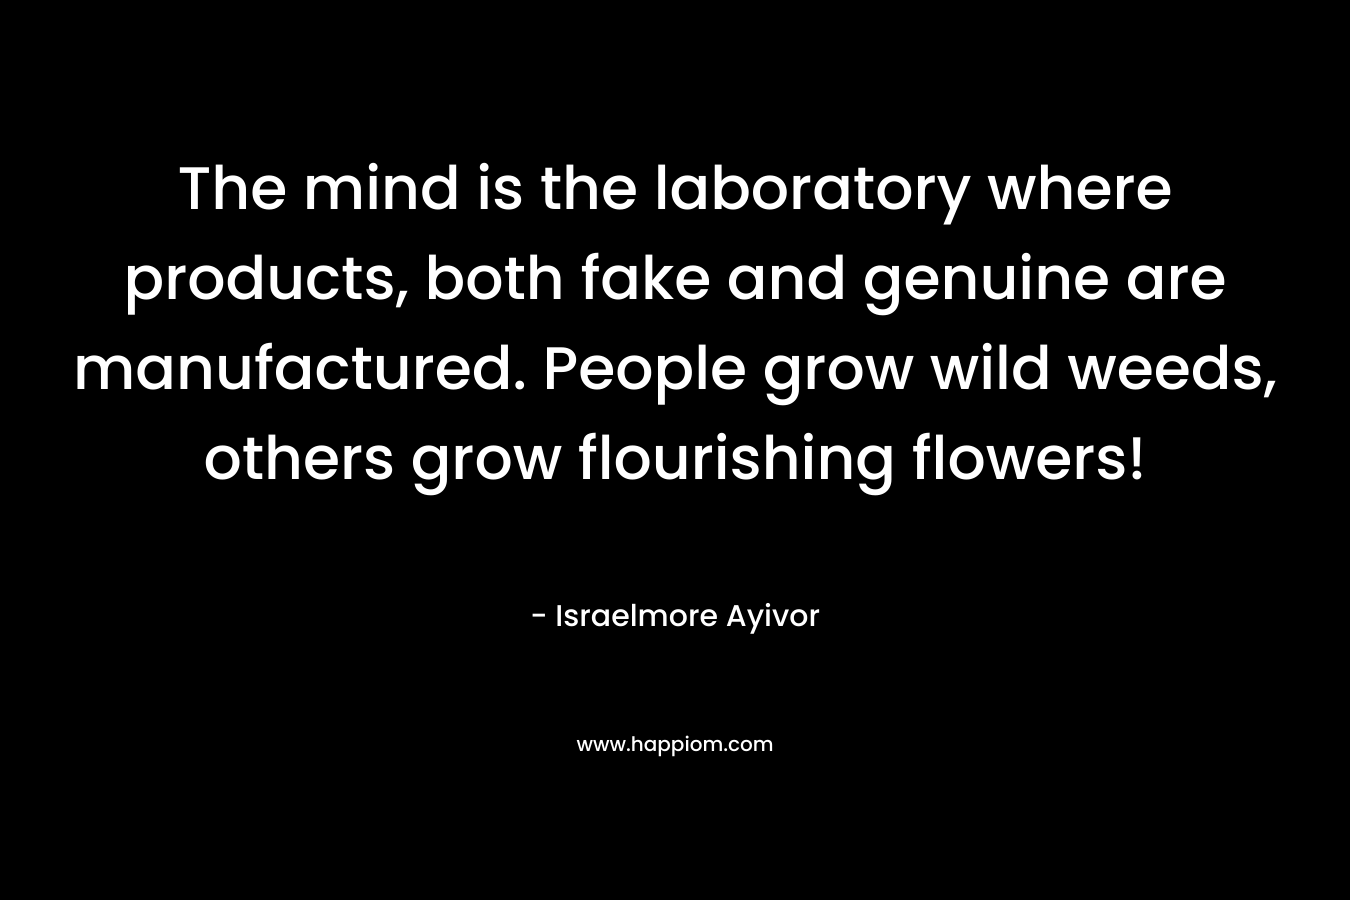 The mind is the laboratory where products, both fake and genuine are manufactured. People grow wild weeds, others grow flourishing flowers!